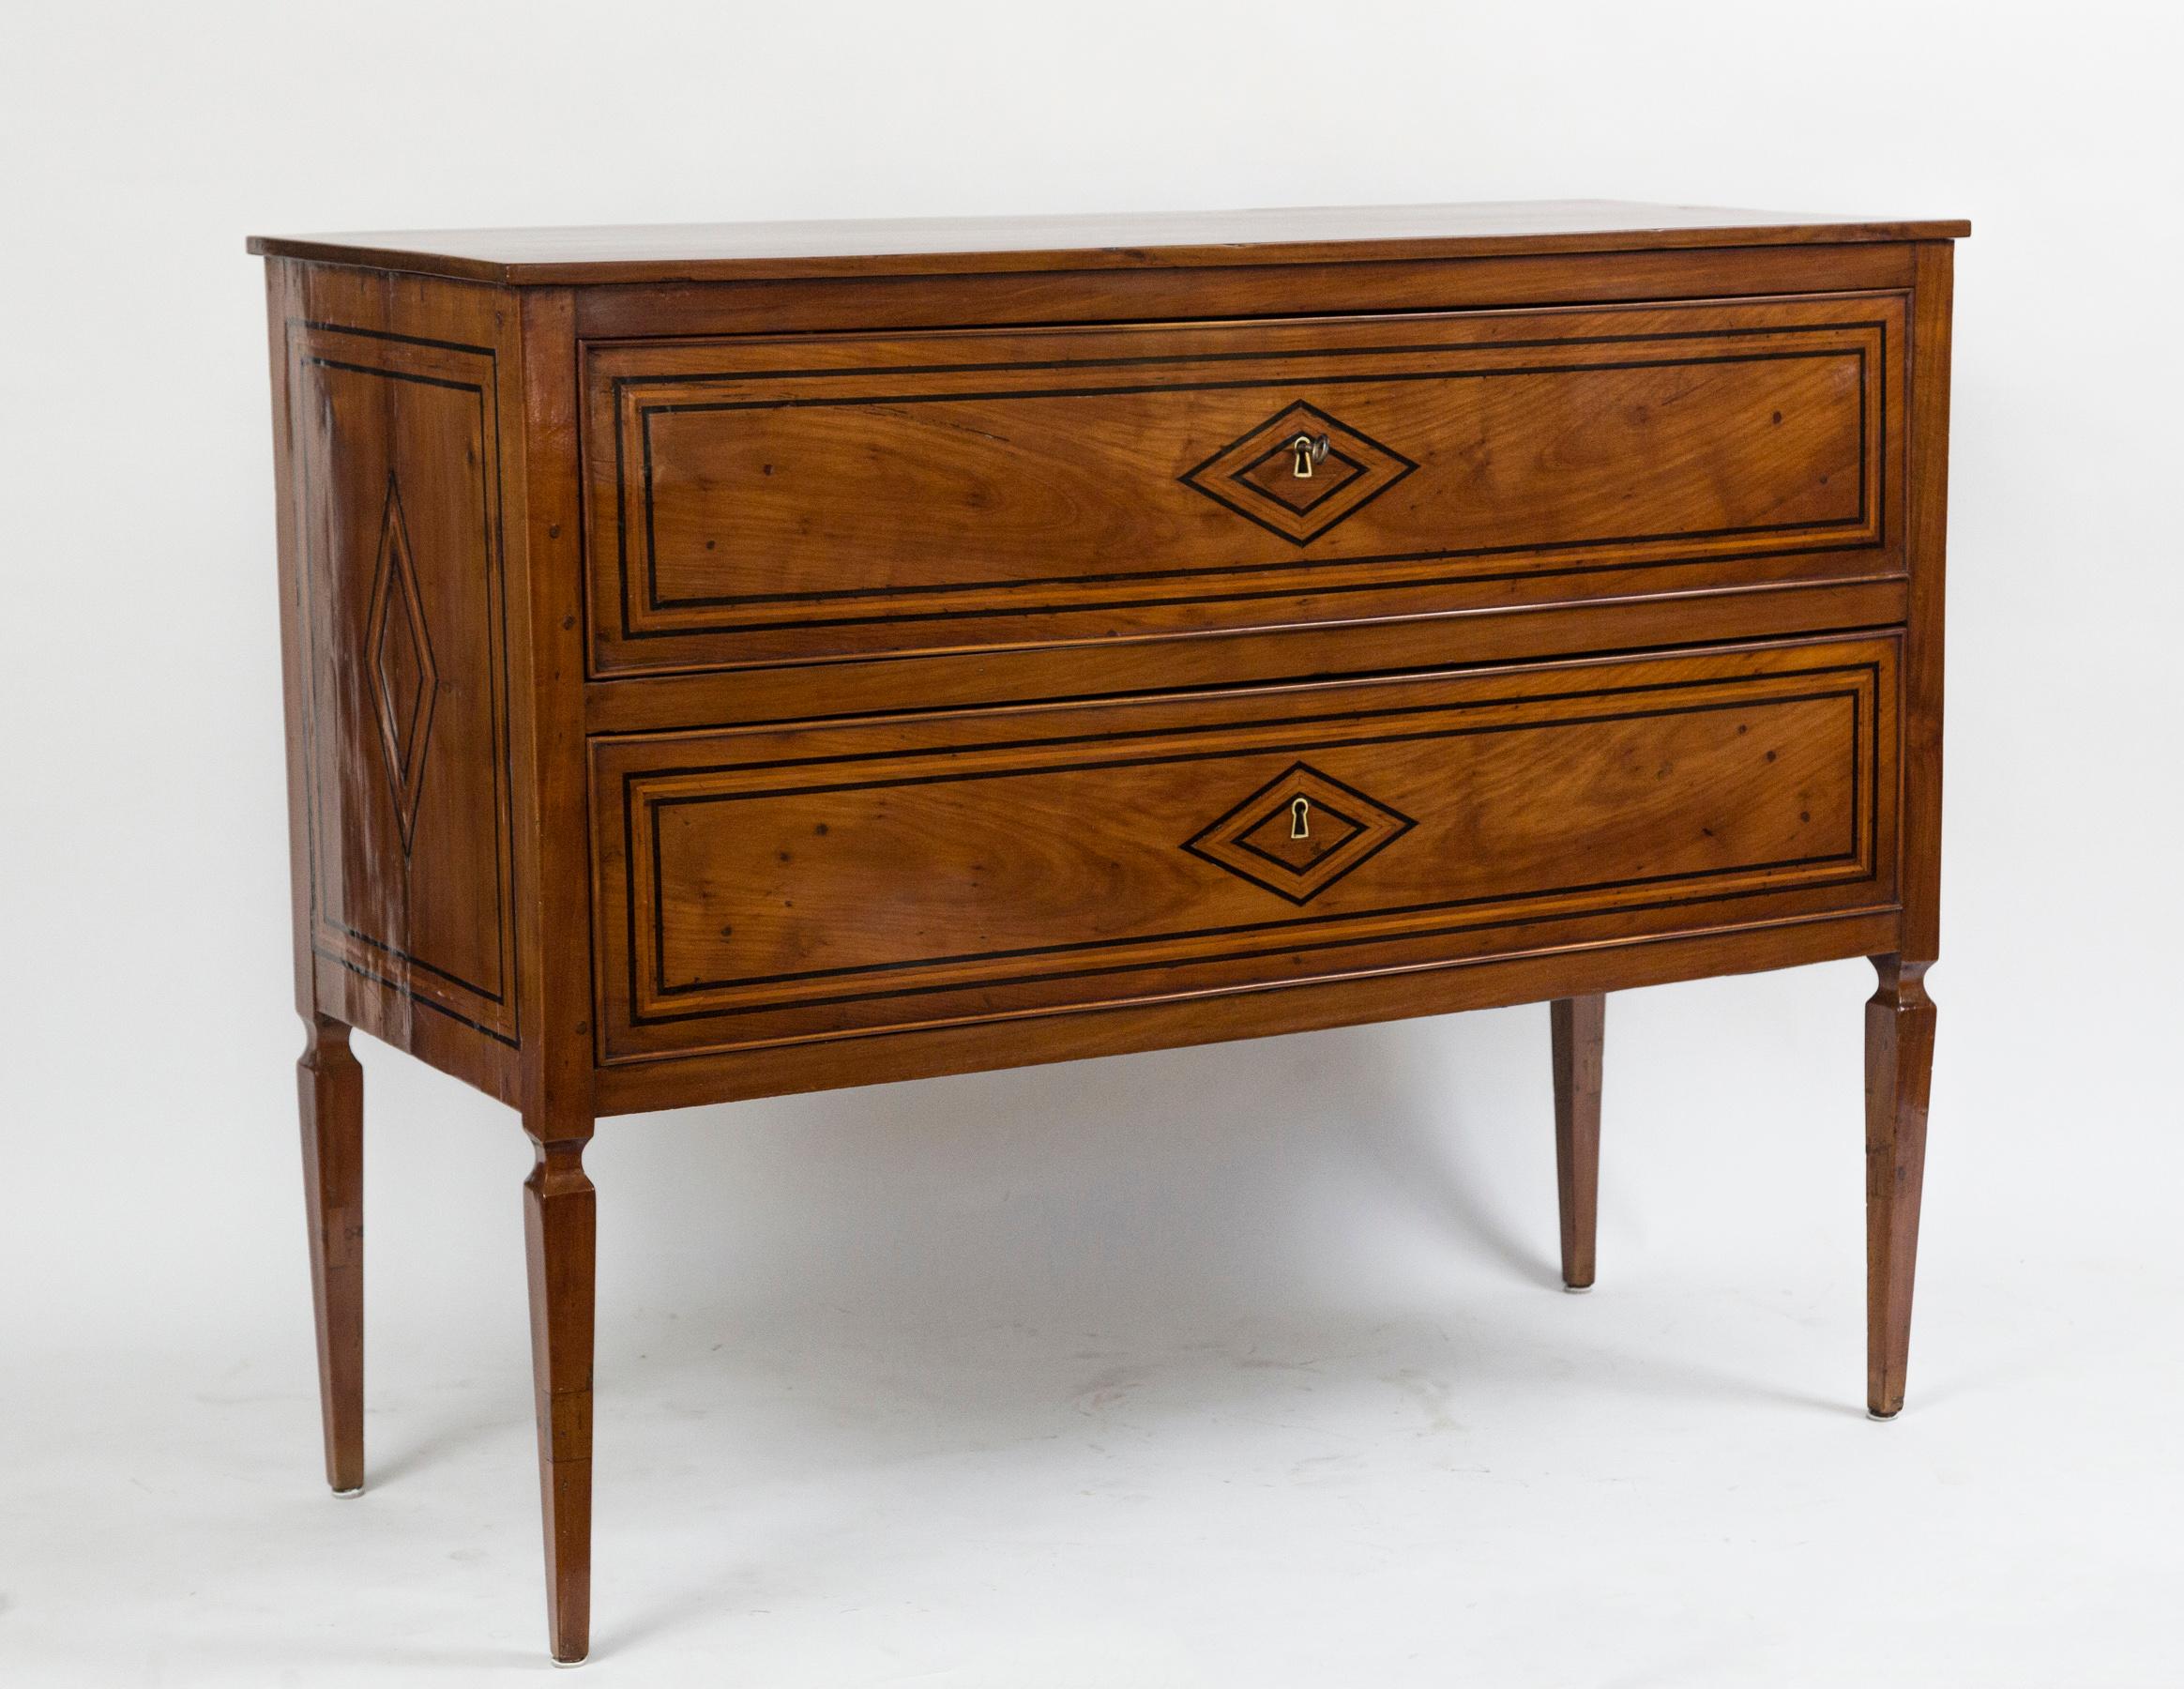 Handsome & tall dark fruitwood two-drawer chest finishing on high squared and tapered legs, adorned with geometric ebony & citron wood inlays
Origin: Southern Italy
Dating: 1880ca
Condition: Very good, recently restored and polished
Dimensions: